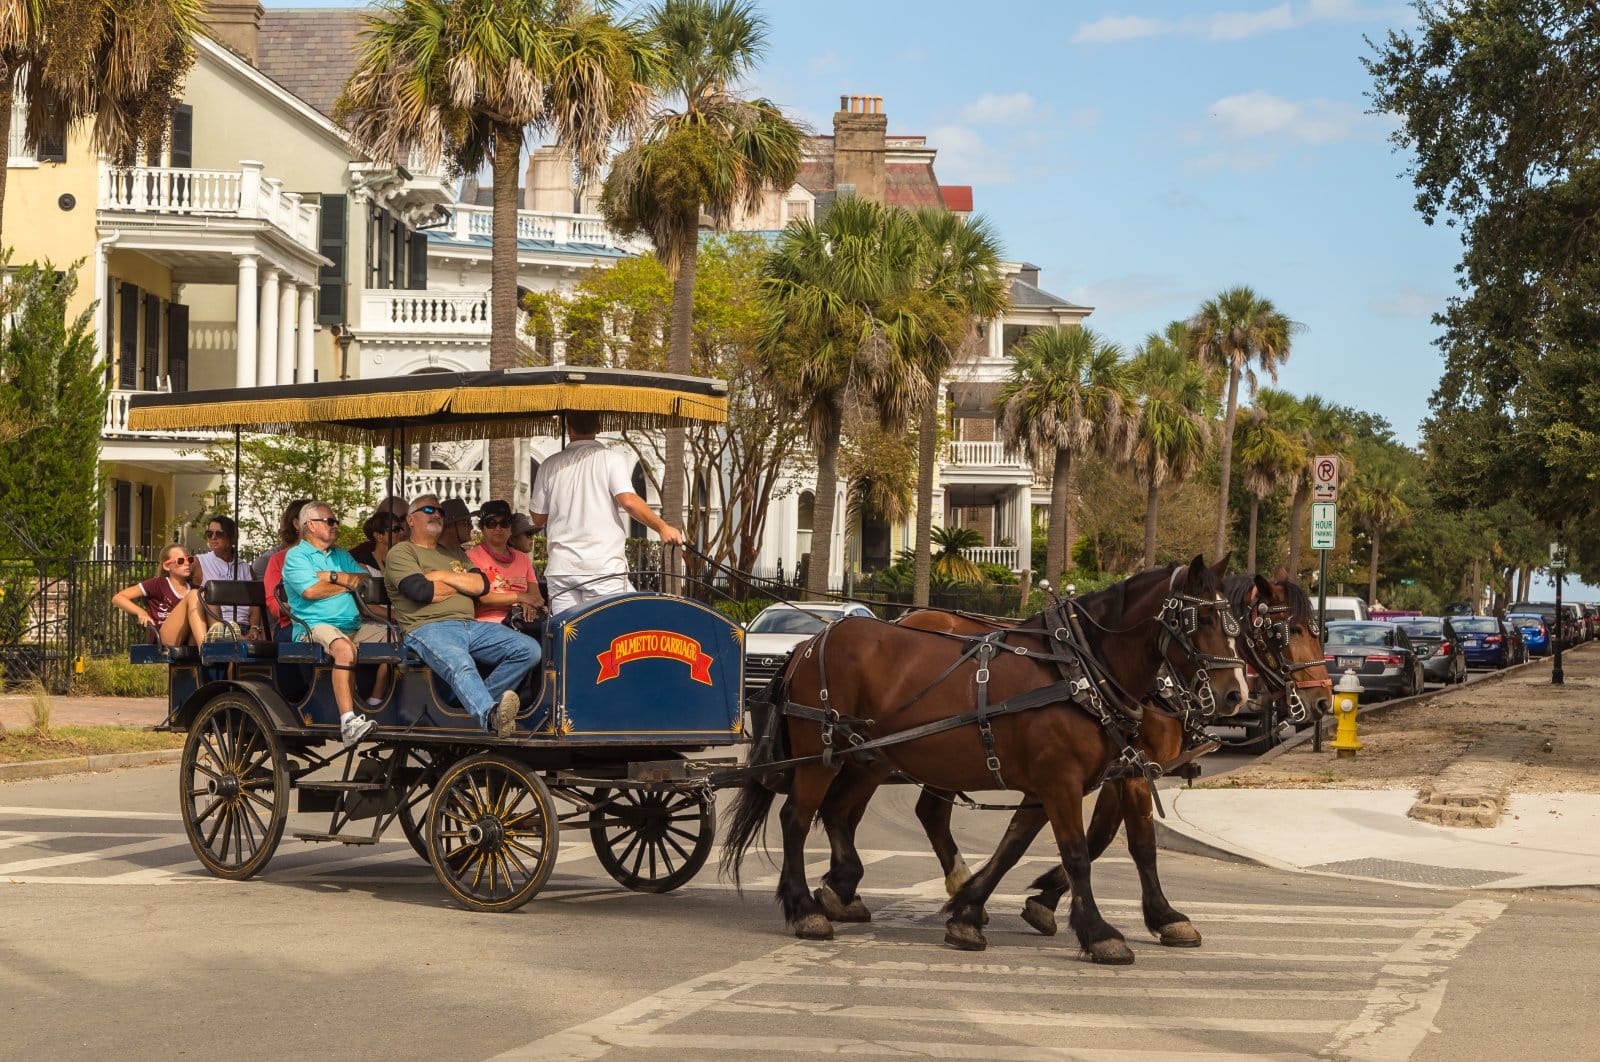 <p>Charleston offers a plethora of attractions. A Charleston Tour Pass is a convenient way to access all the top tours and attractions, including Fort Sumter Tours, Carriage Tours, and Waterfront Park.</p> <p><b>Fellow Traveler Tip: </b>The Free Historic Trolley can make navigating the city a breeze for those unable to explore entirely on foot. Parking at the Visitor Center Parking Garage or City Market Parking Garages provides convenient options.</p>